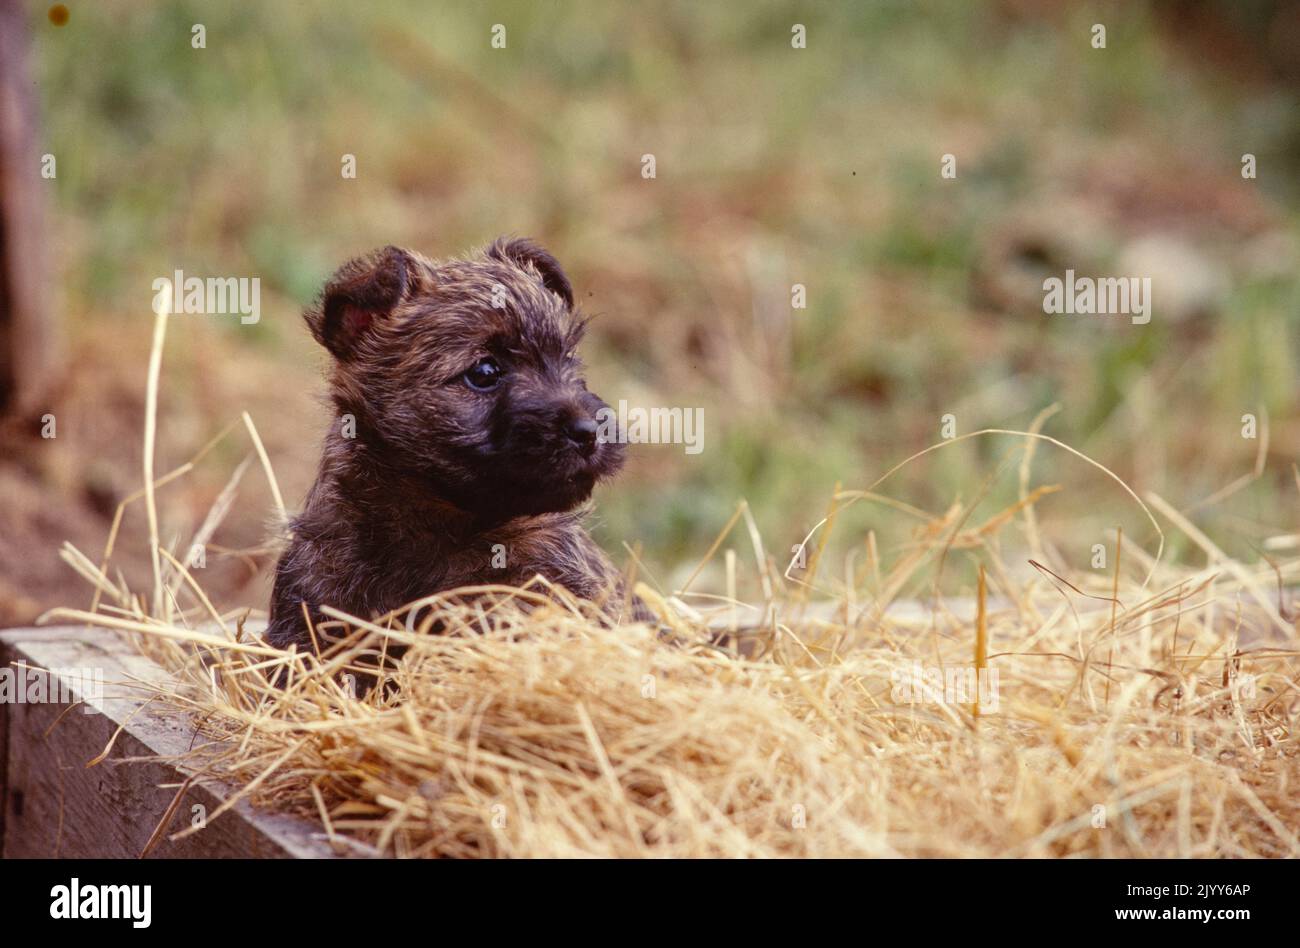 Cairn Terrier puppy sitting up in hay outside Stock Photo